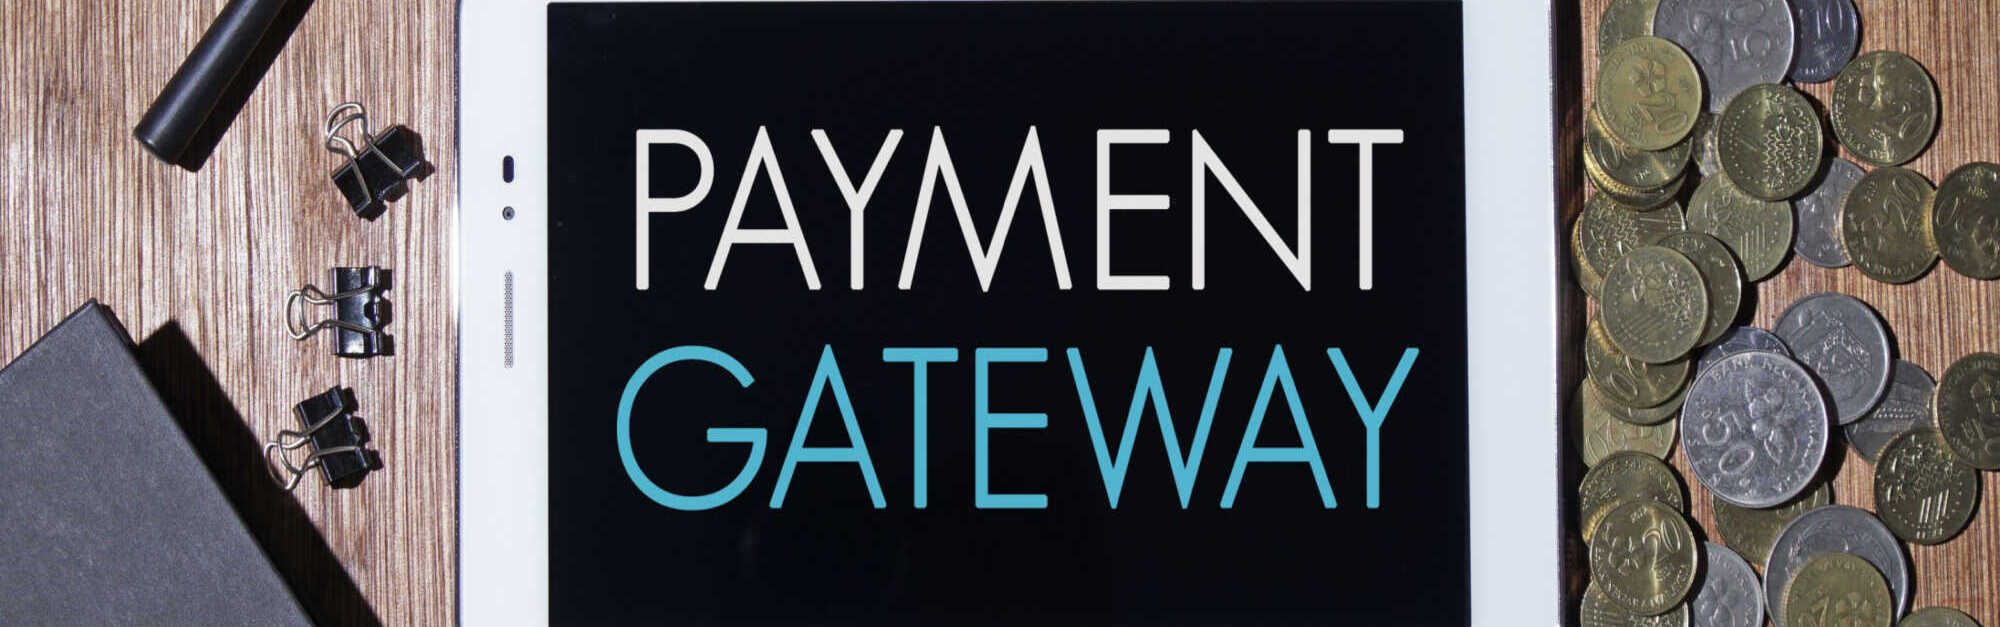 image of payment gateway